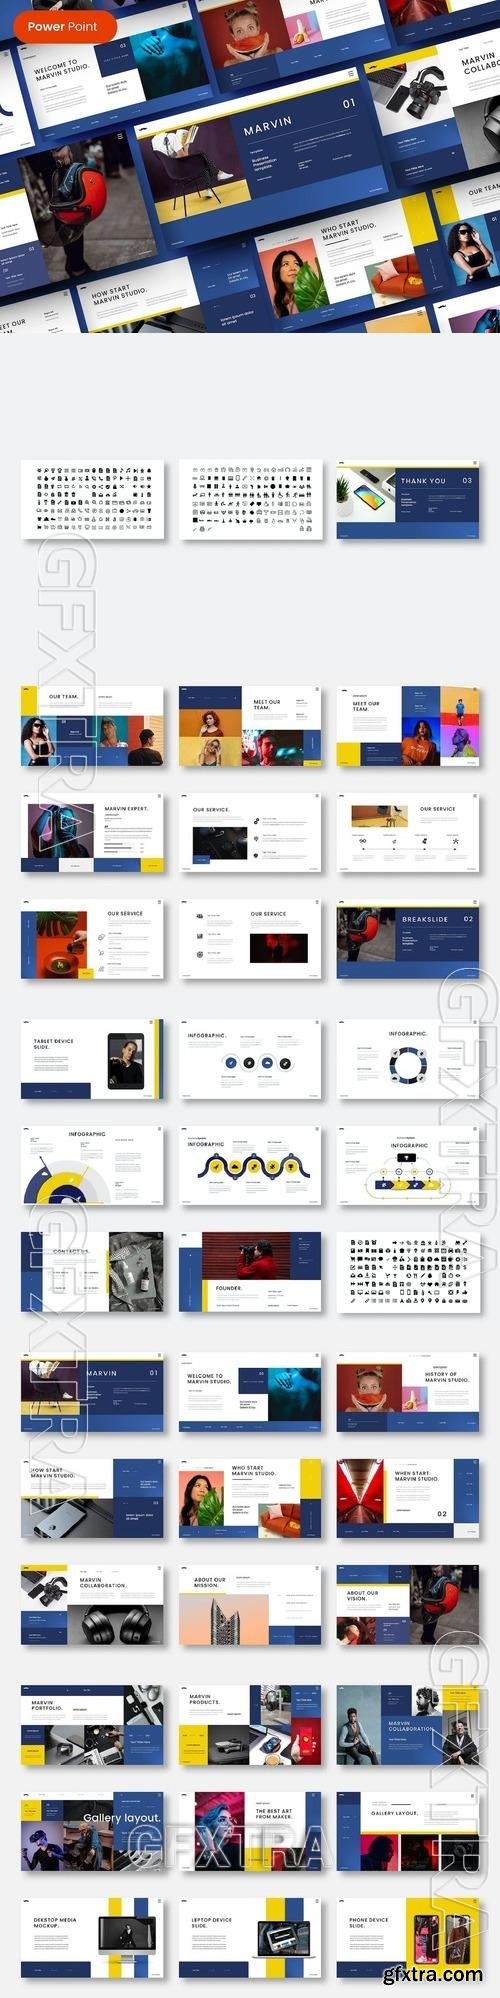 Marvin - Business PowerPoint Template F5W7HFB